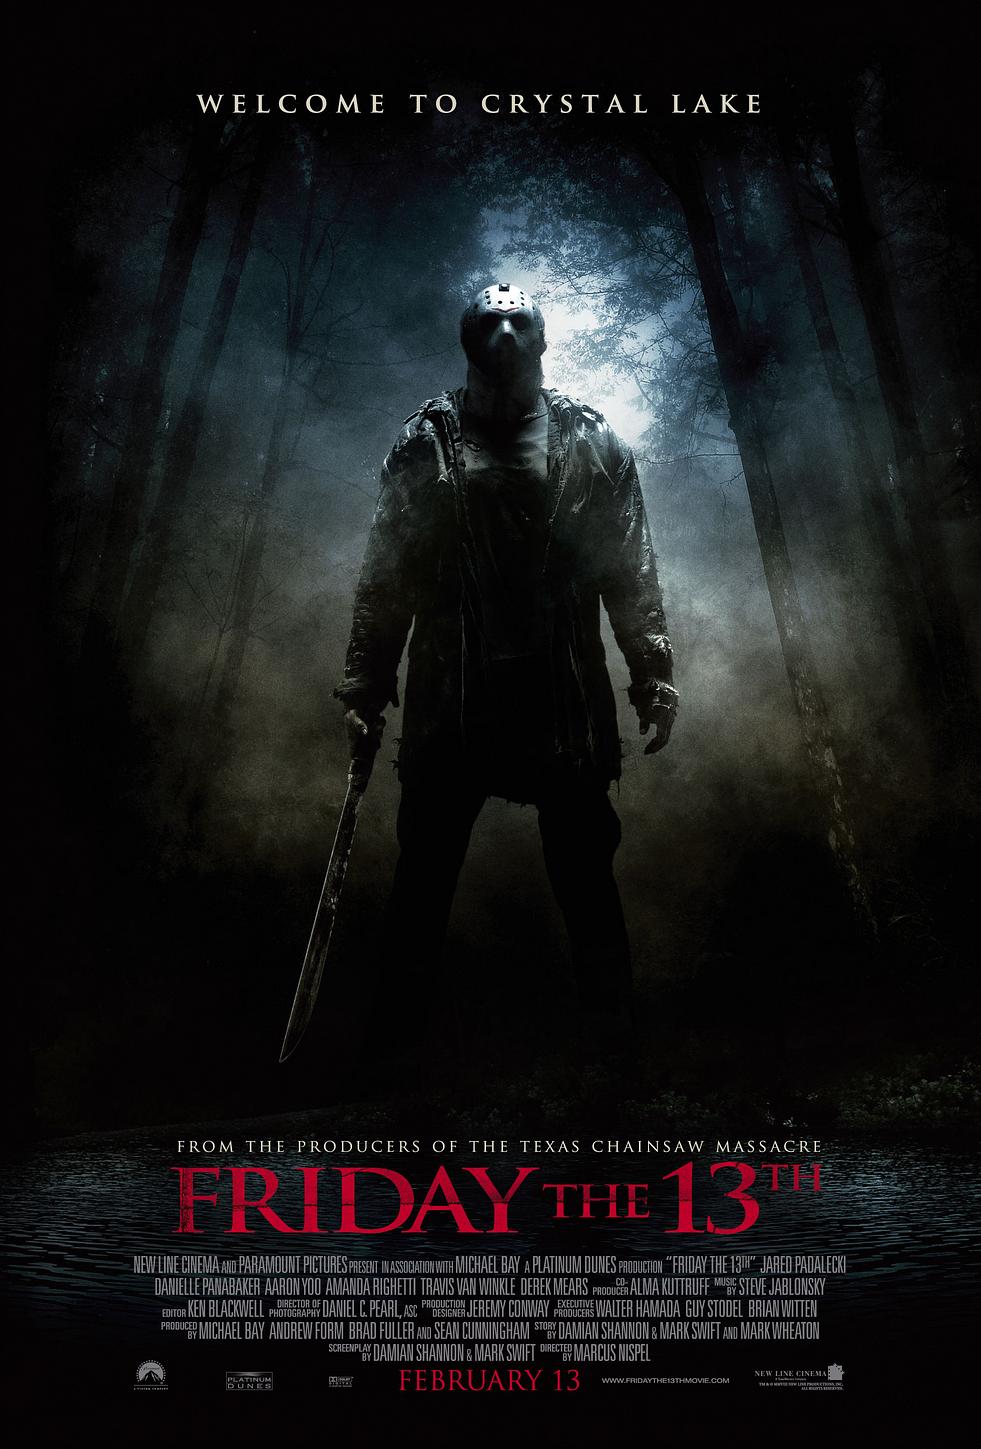 ɫ/13 Friday.The.13th.2009.EXTENDED.1080p.BluRay.x264-Japhson 7.95GB-1.png